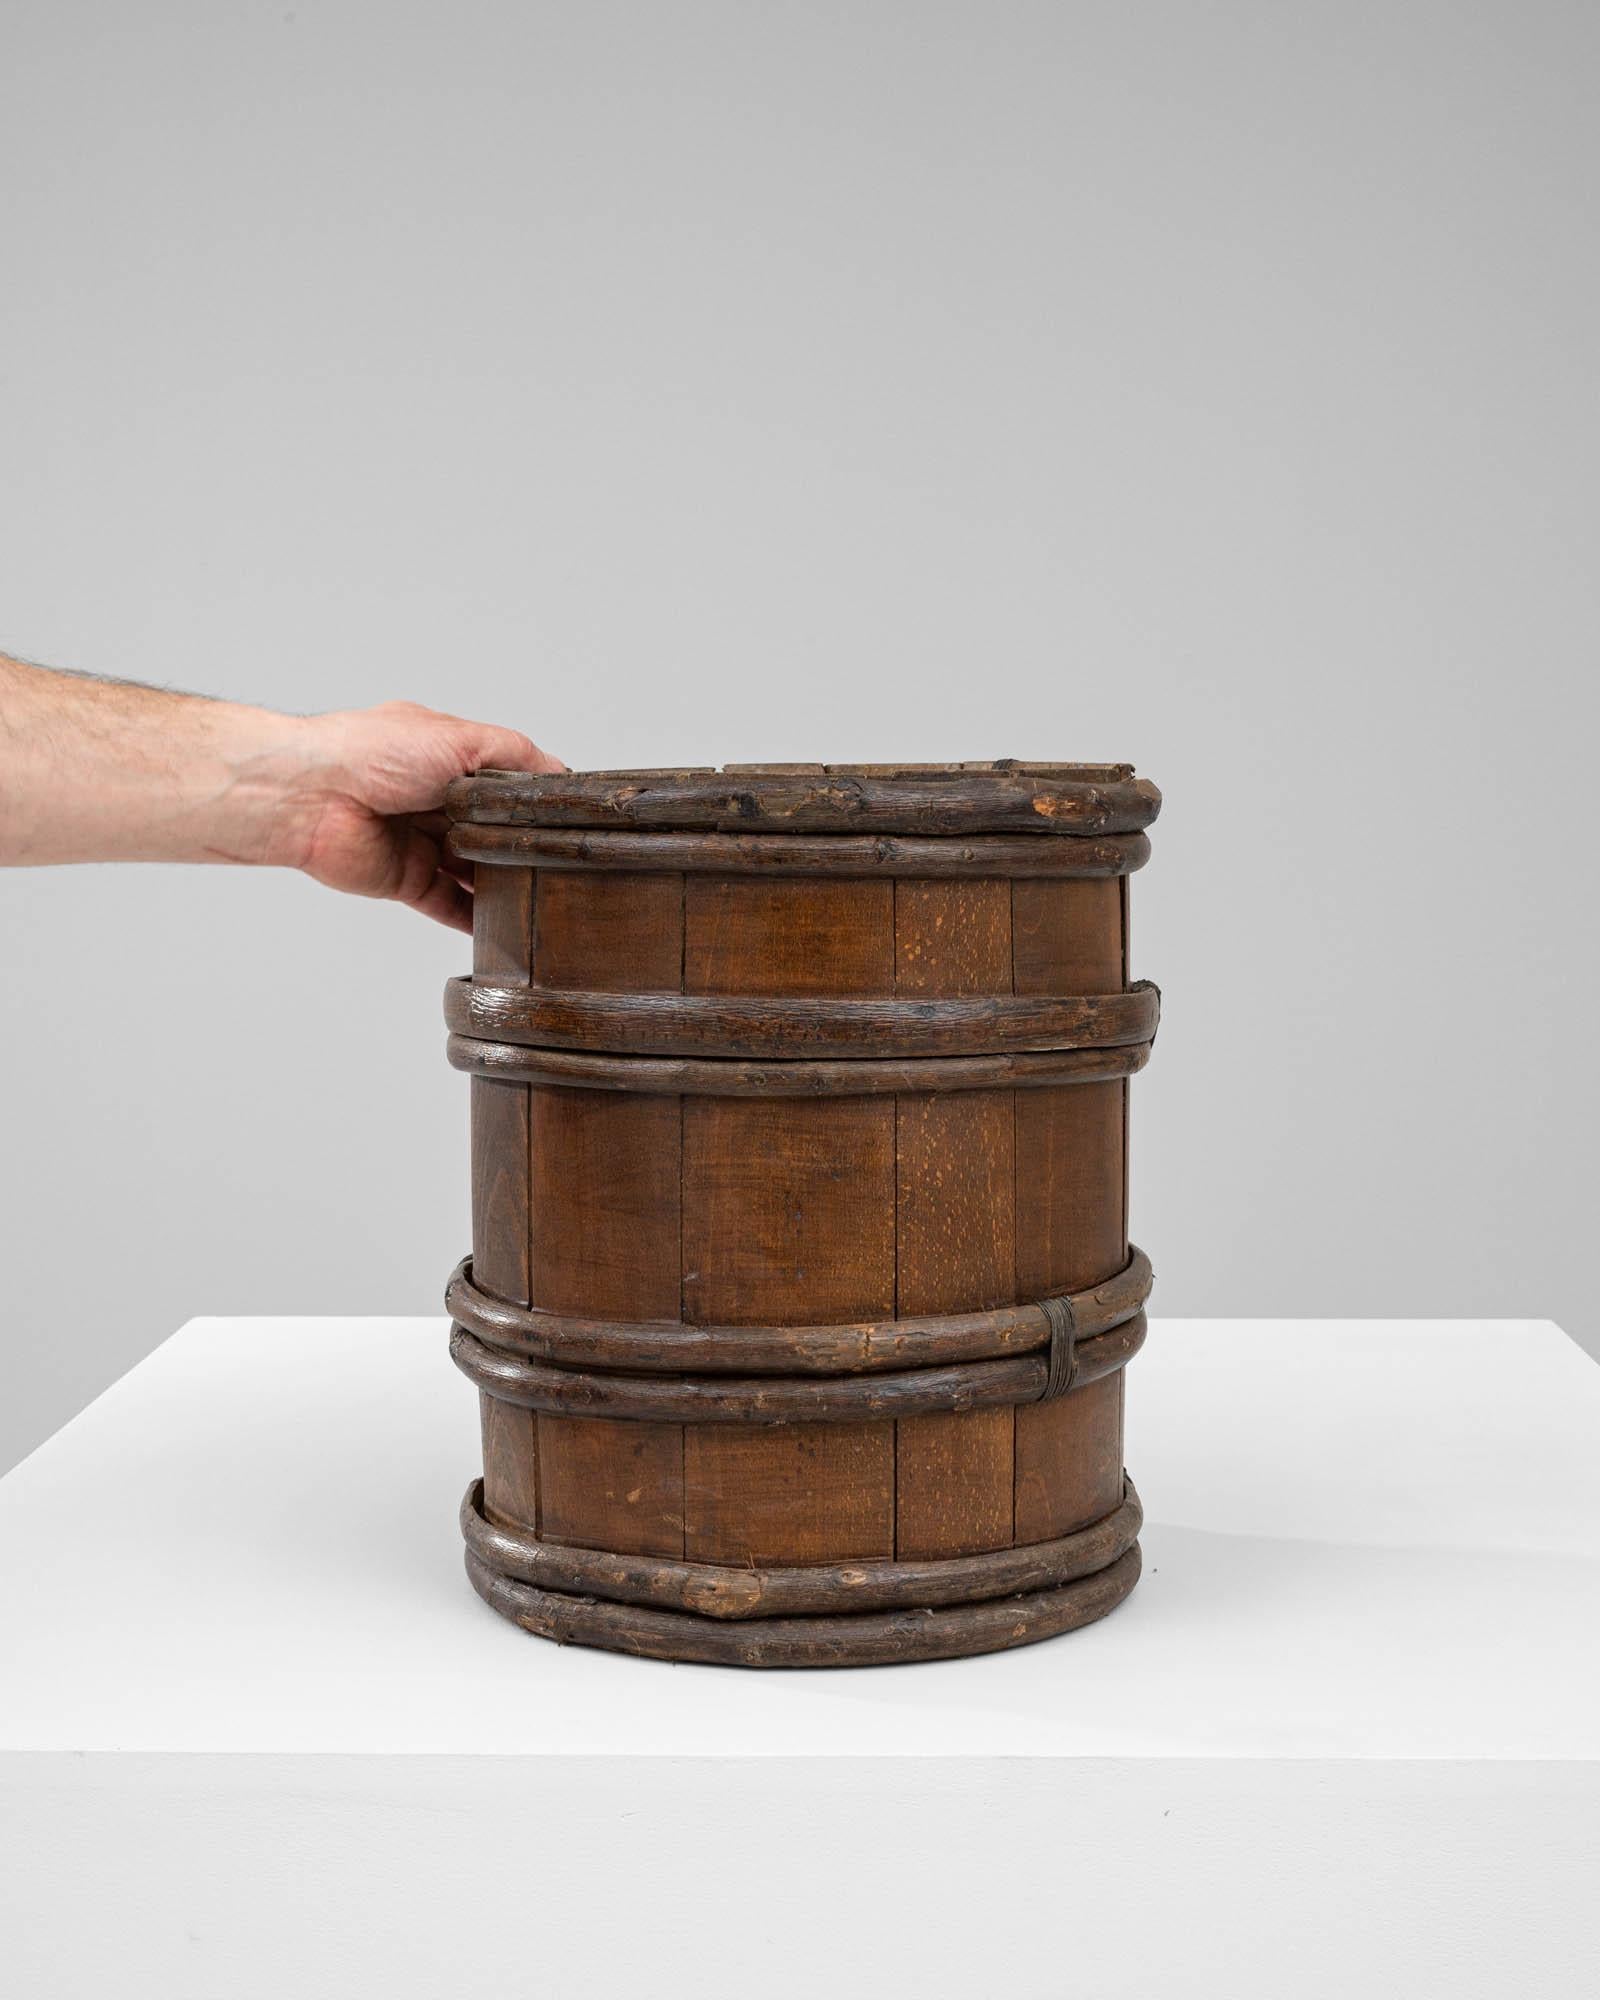 This 19th Century French Wooden Barrel evokes nostalgia for a time when craftsmanship and rustic elegance were paramount. Crafted with precision and care, its petite size reminiscent of a cup, this barrel carries with it the charm of yesteryears.